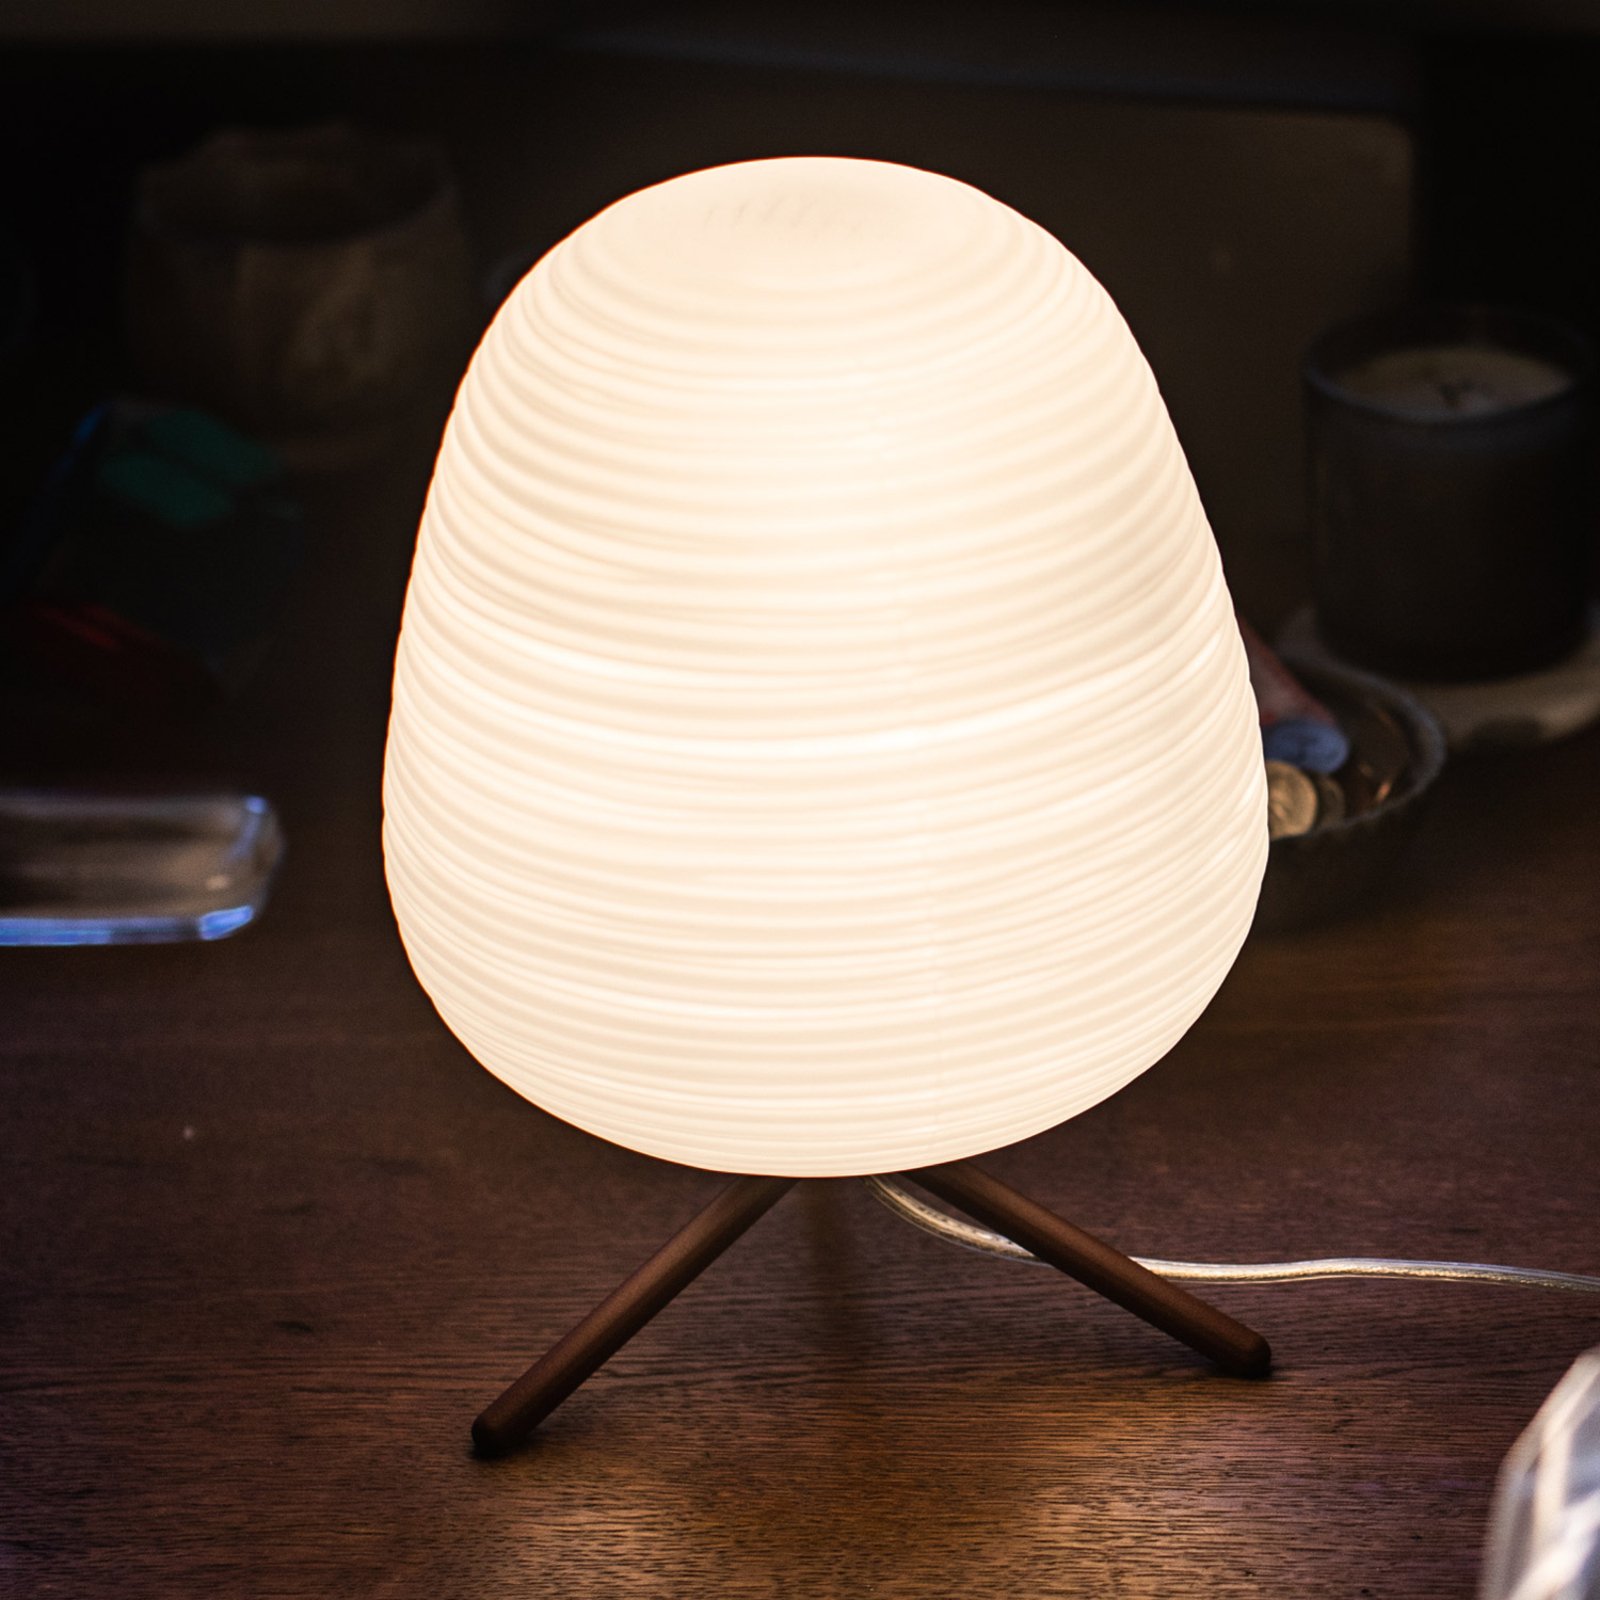 Foscarini Rituals 3 glass table lamp with dimmer